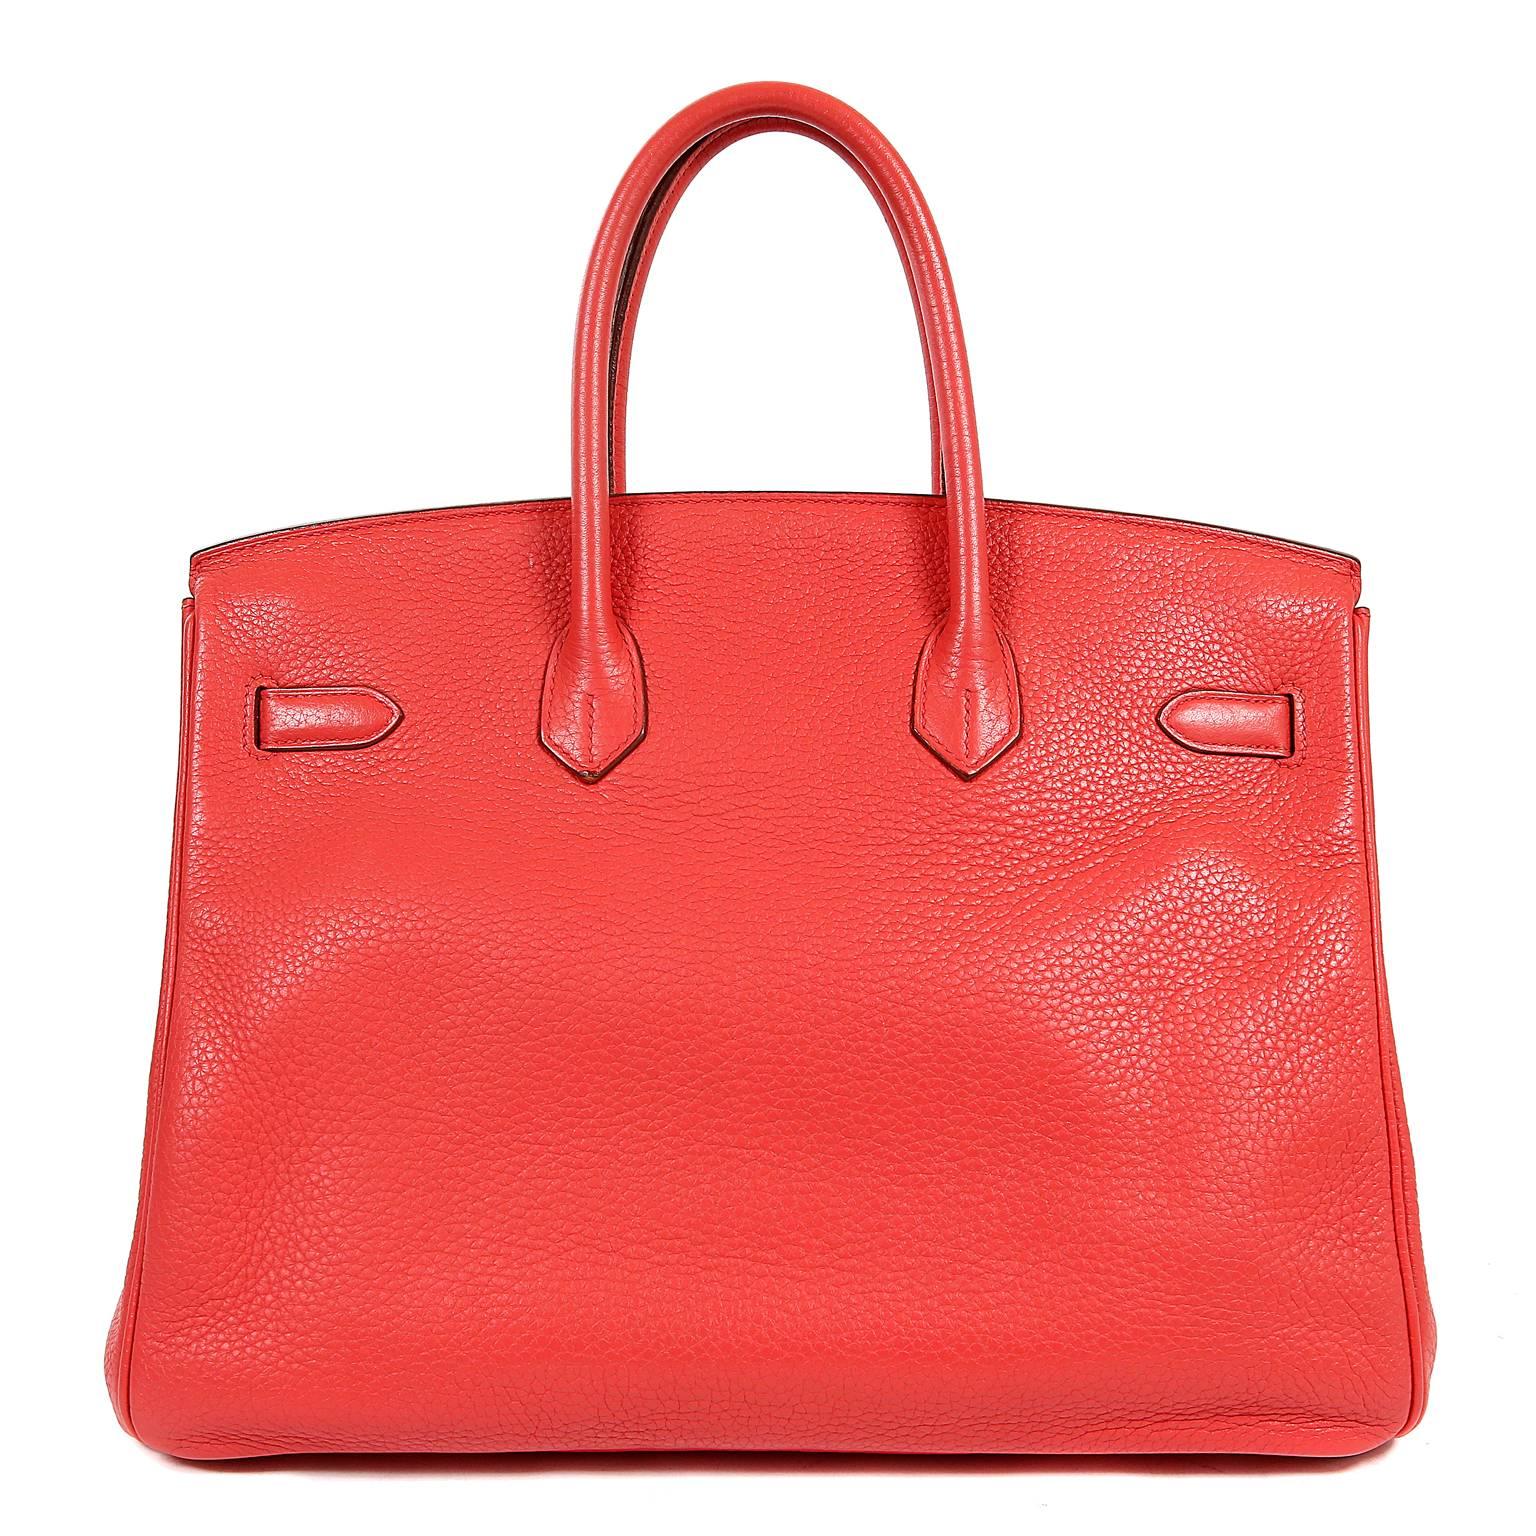 Hermès Bougainvillea Clemence 35 cm Birkin- Nearly Pristine Condition; plastic still on much of the Palladium hardware.  Hermès bags are considered the ultimate luxury item the world over.  Hand stitched by skilled craftsmen, wait lists of a year or